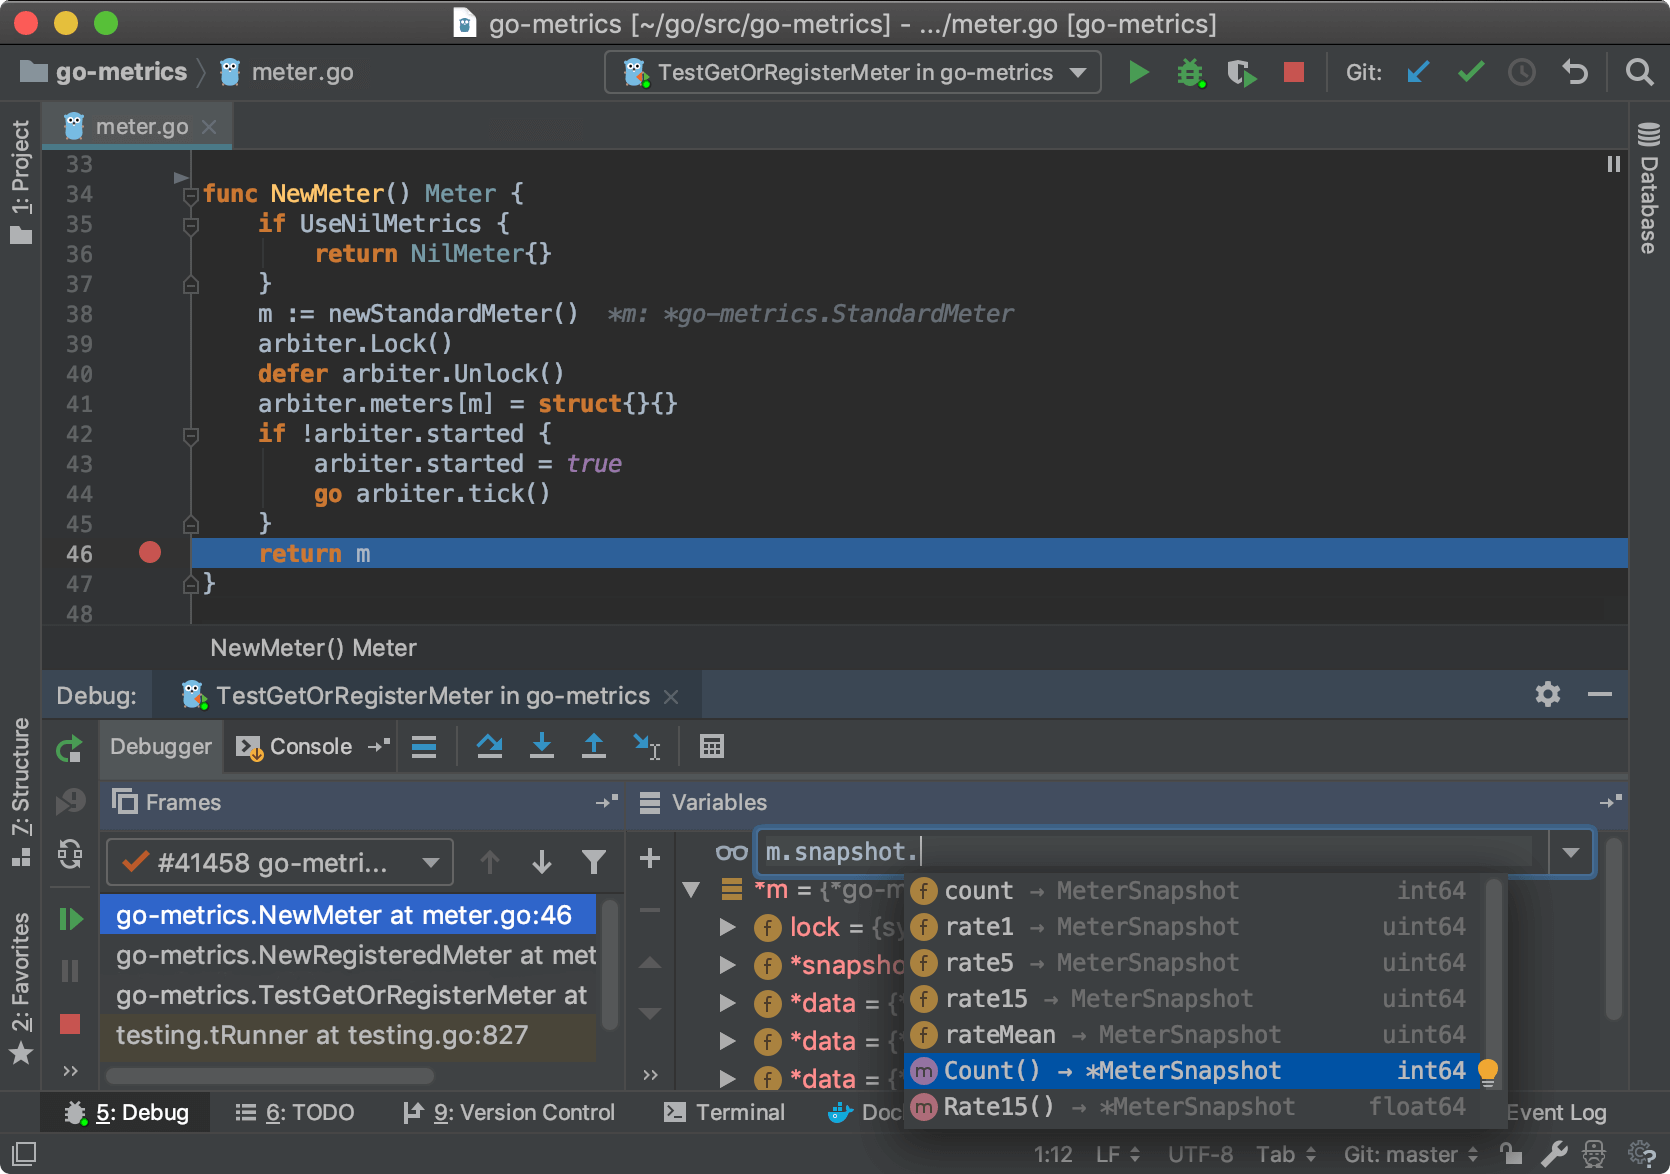 GoLand by JetBrains: More than just a Go IDE